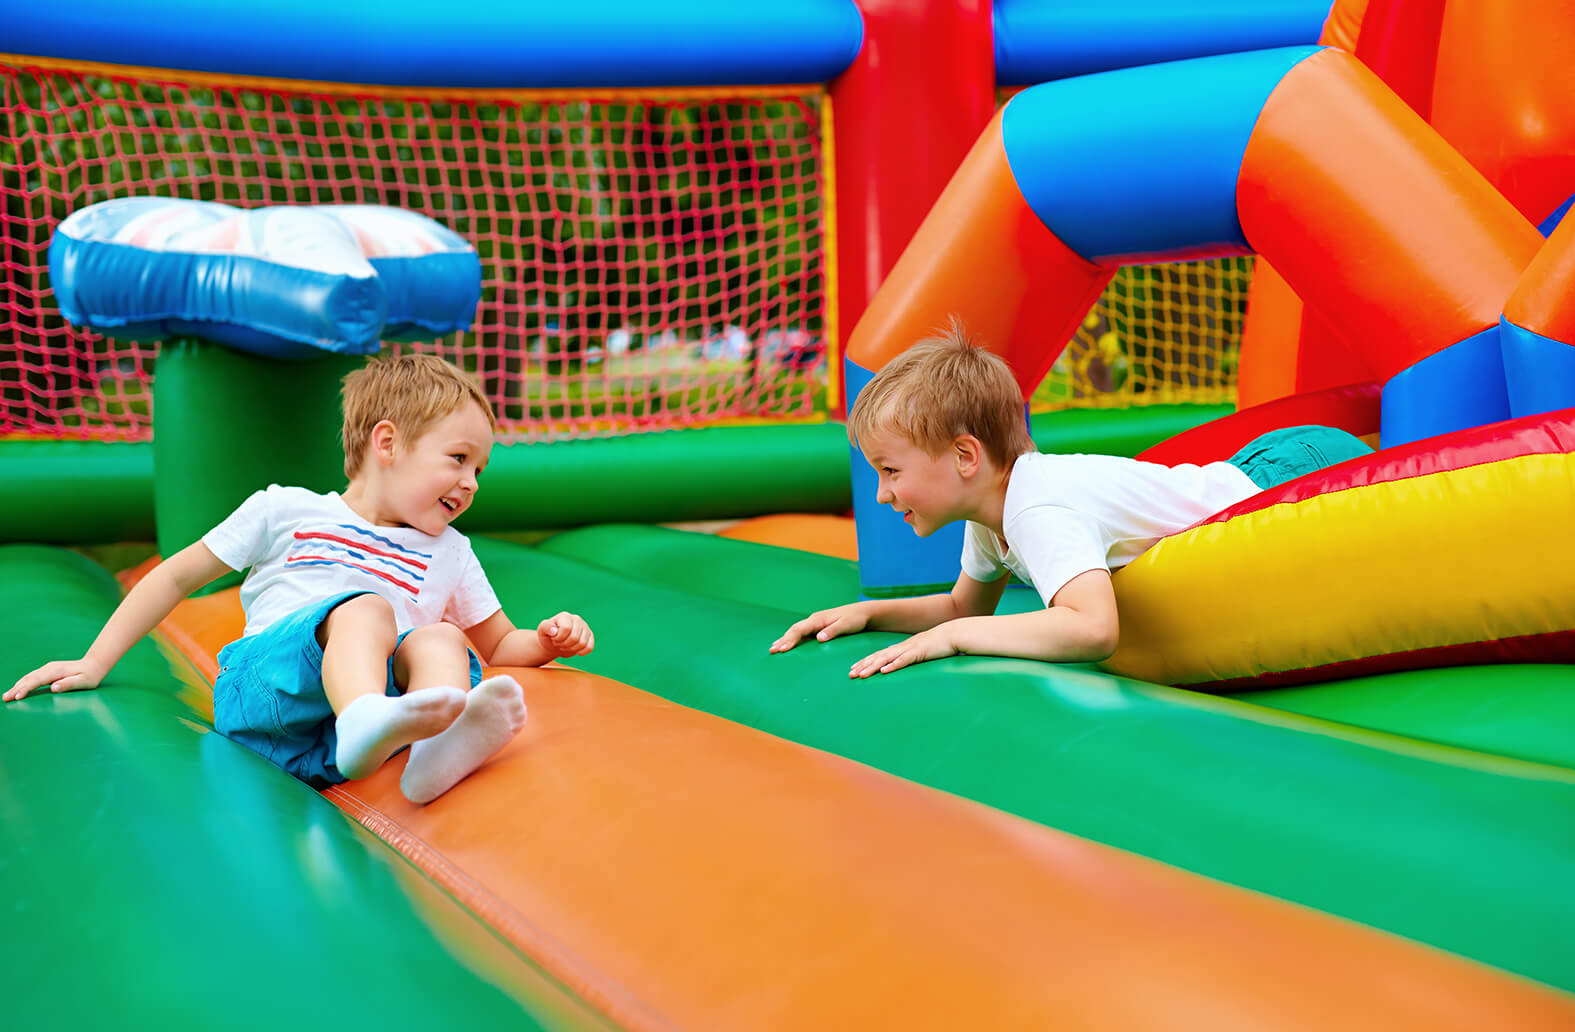 Children playing in bounce house rental